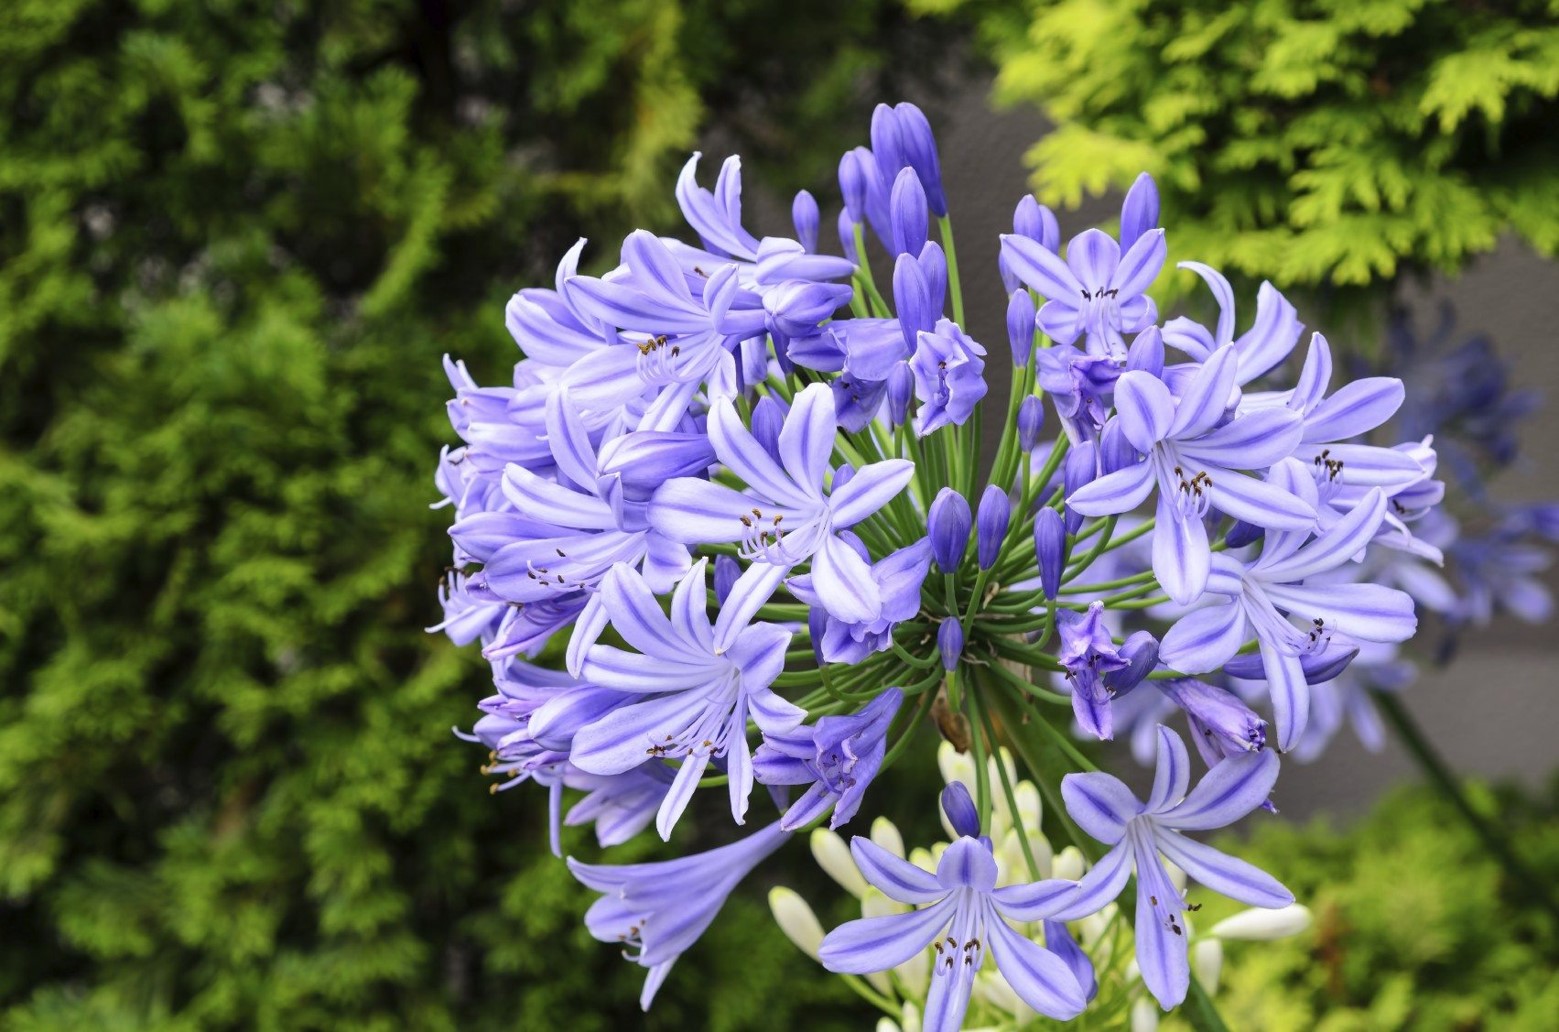 HOW TO GROW AND CARE FOR AGAPANTHUS